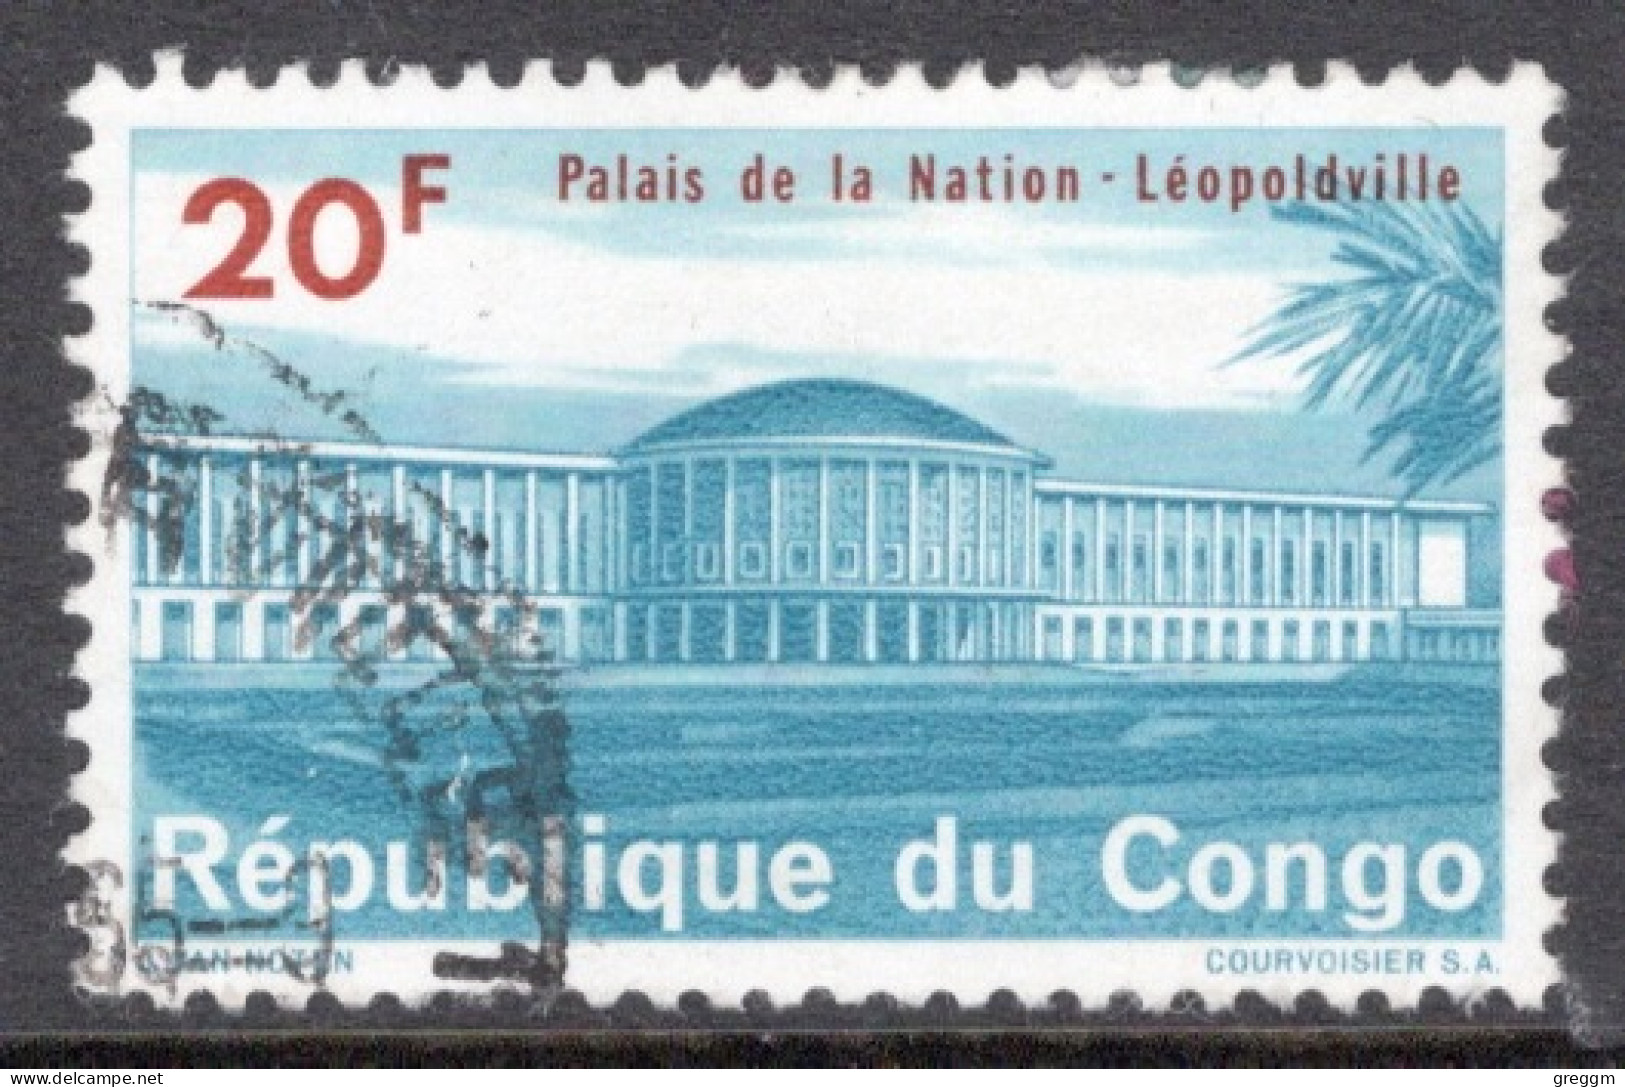 Kinshasa Congo 1964 Single 20f Stamp From The Definitive Set  National Palace, Leopoldville  In Fine Used. - Gebruikt